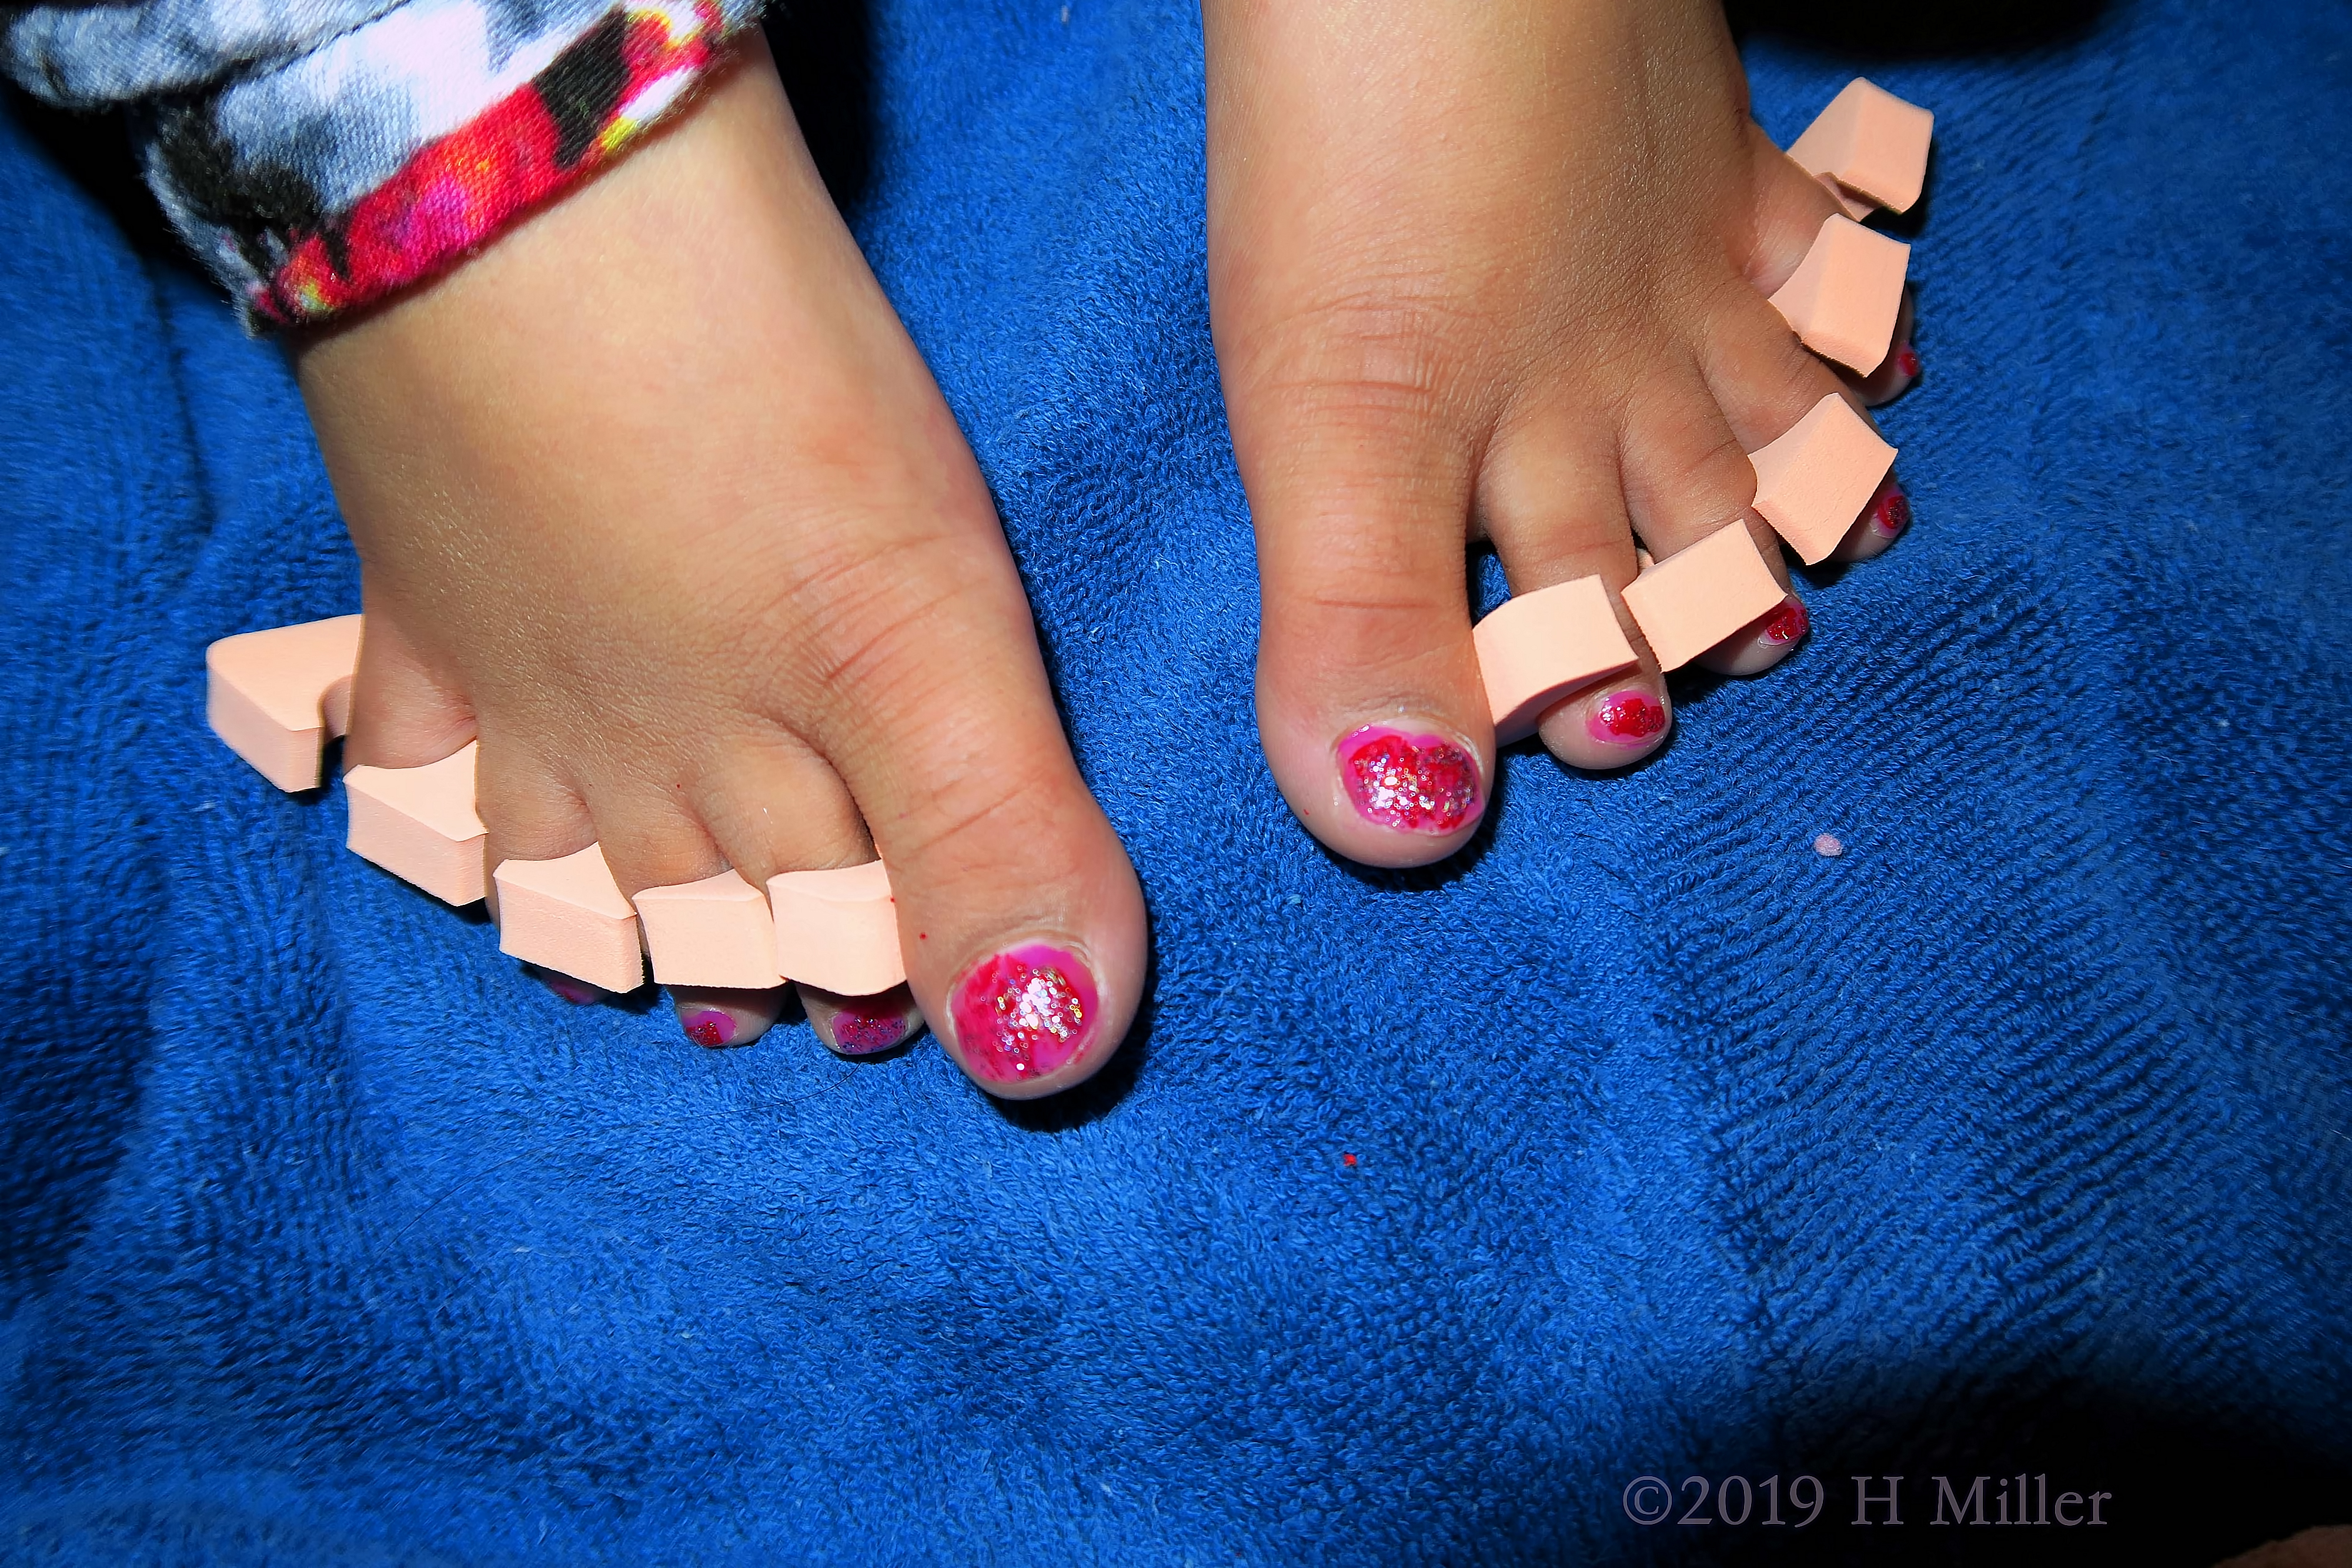 Pleasantly Pink Pedi! Kids Pedi On This Party Guest! 4